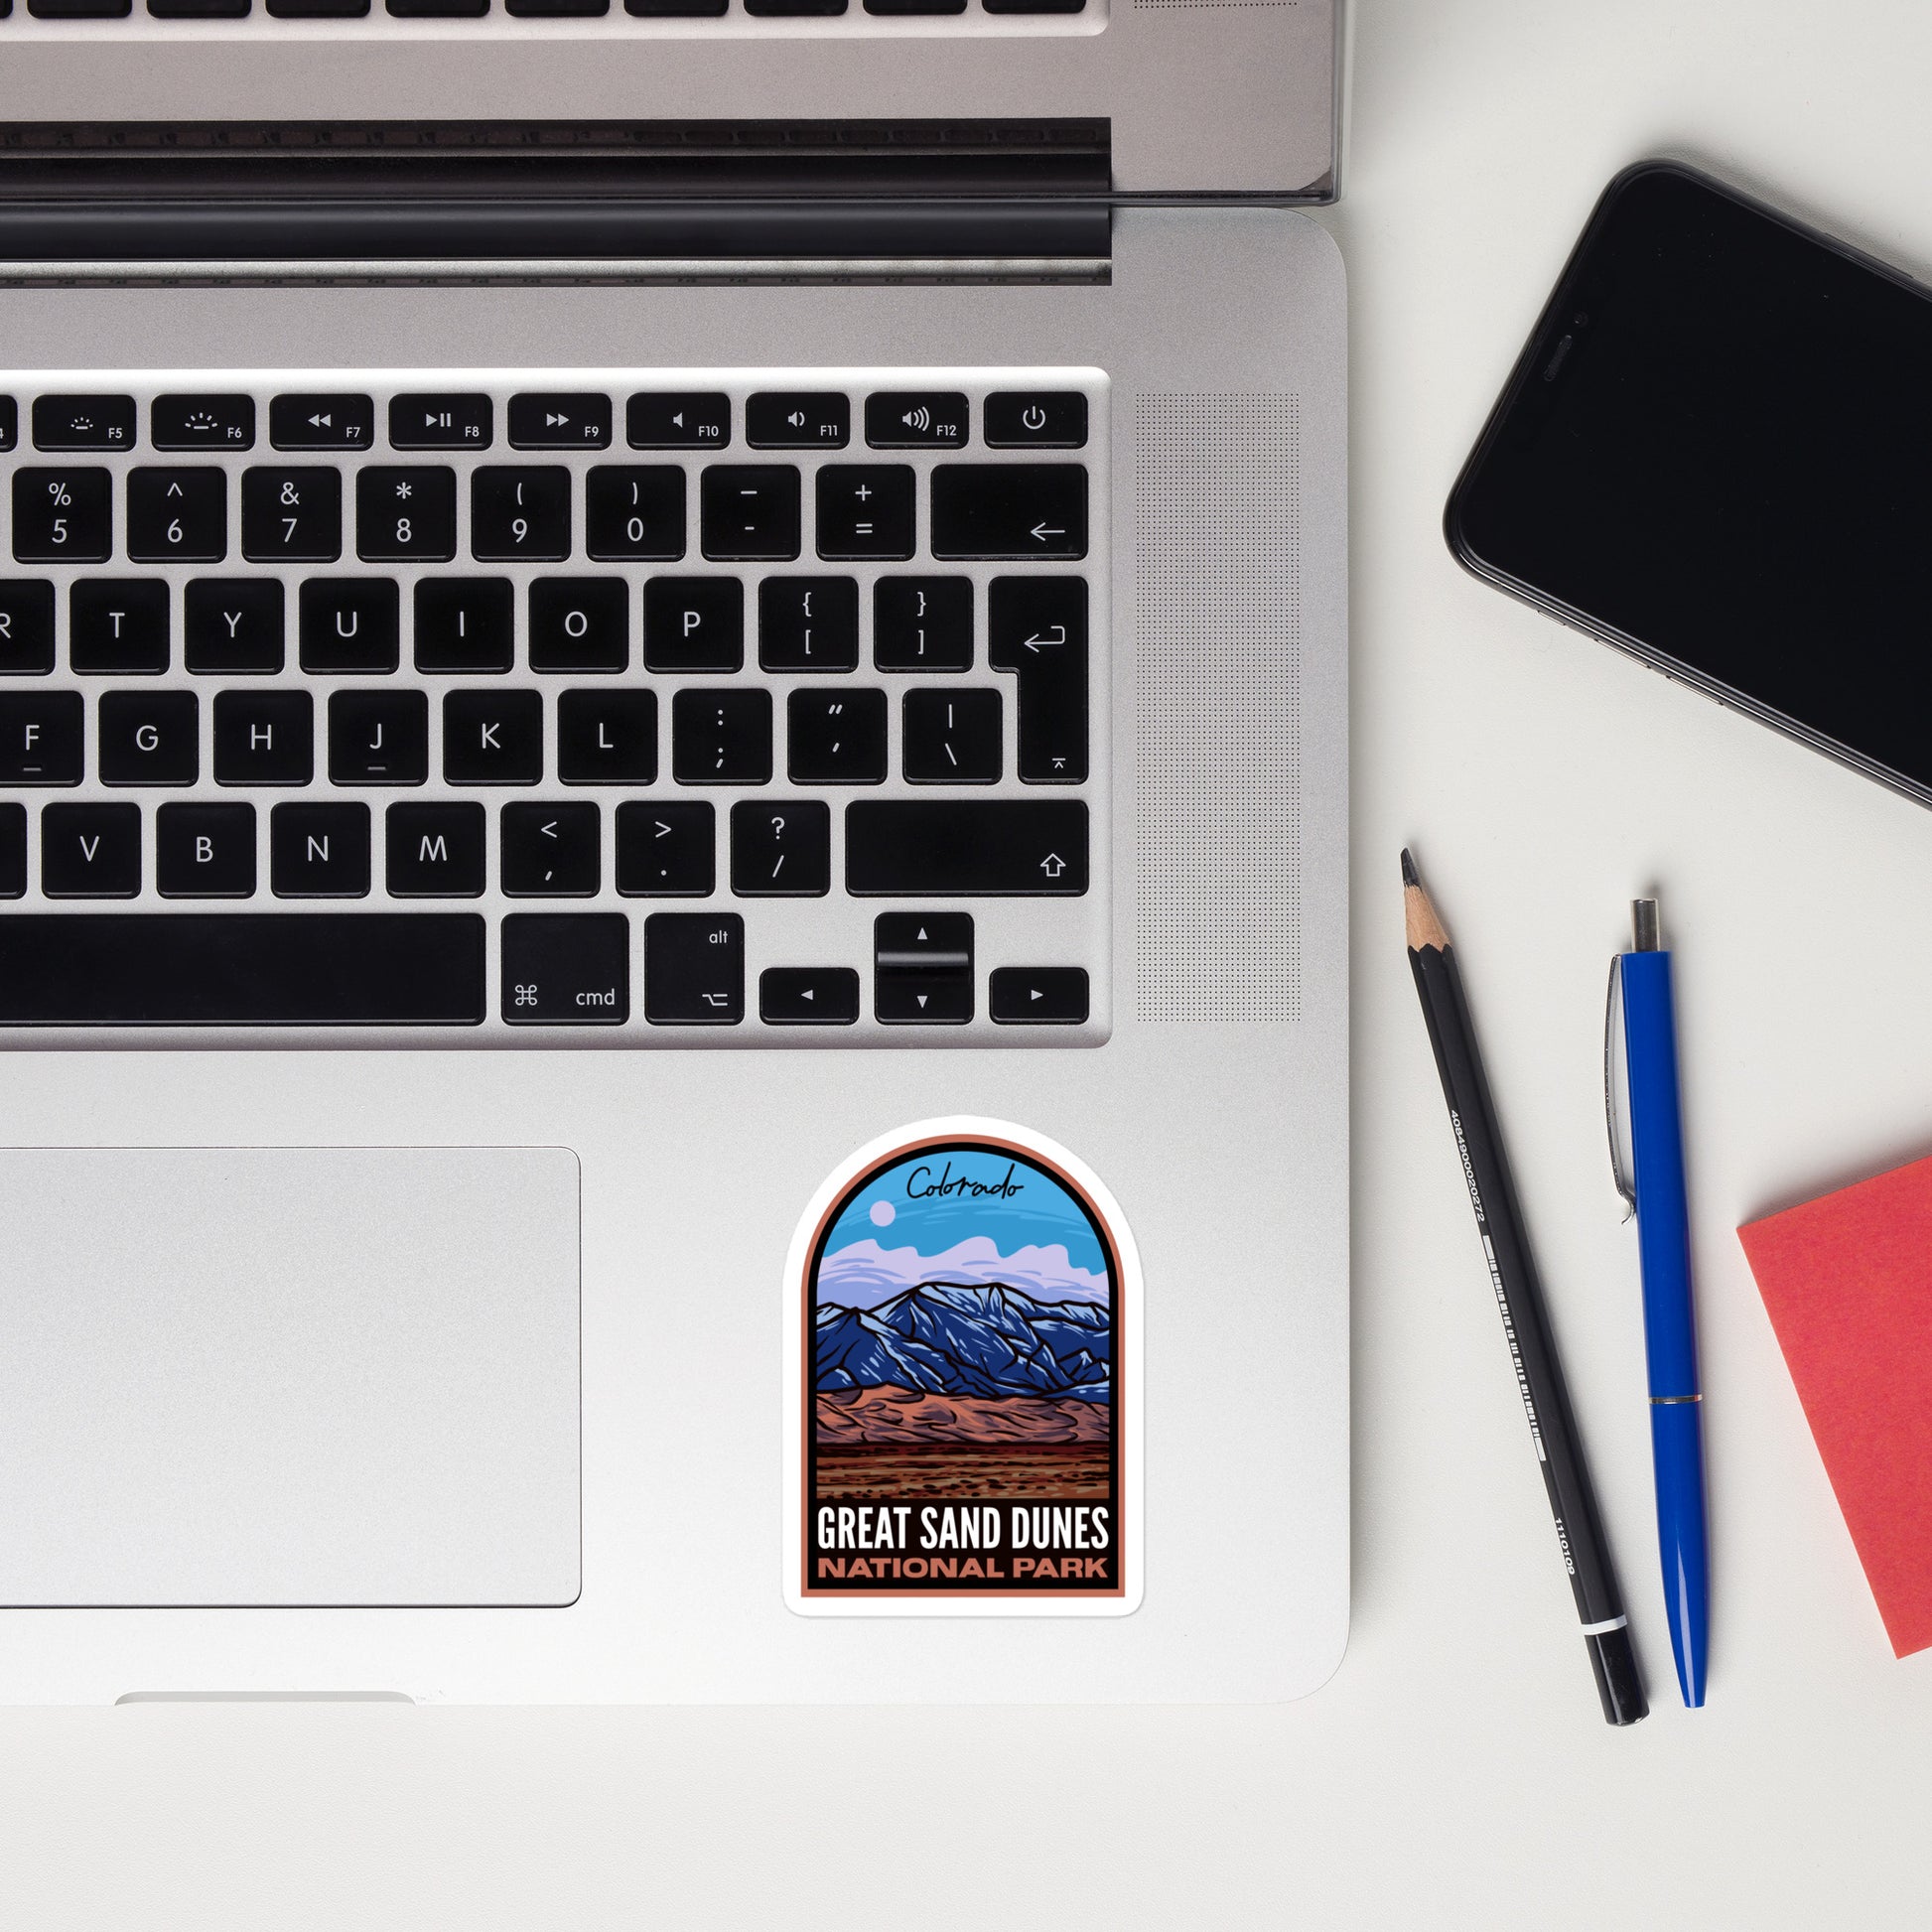 A sticker of Great Sand Dunes National Park on a laptop